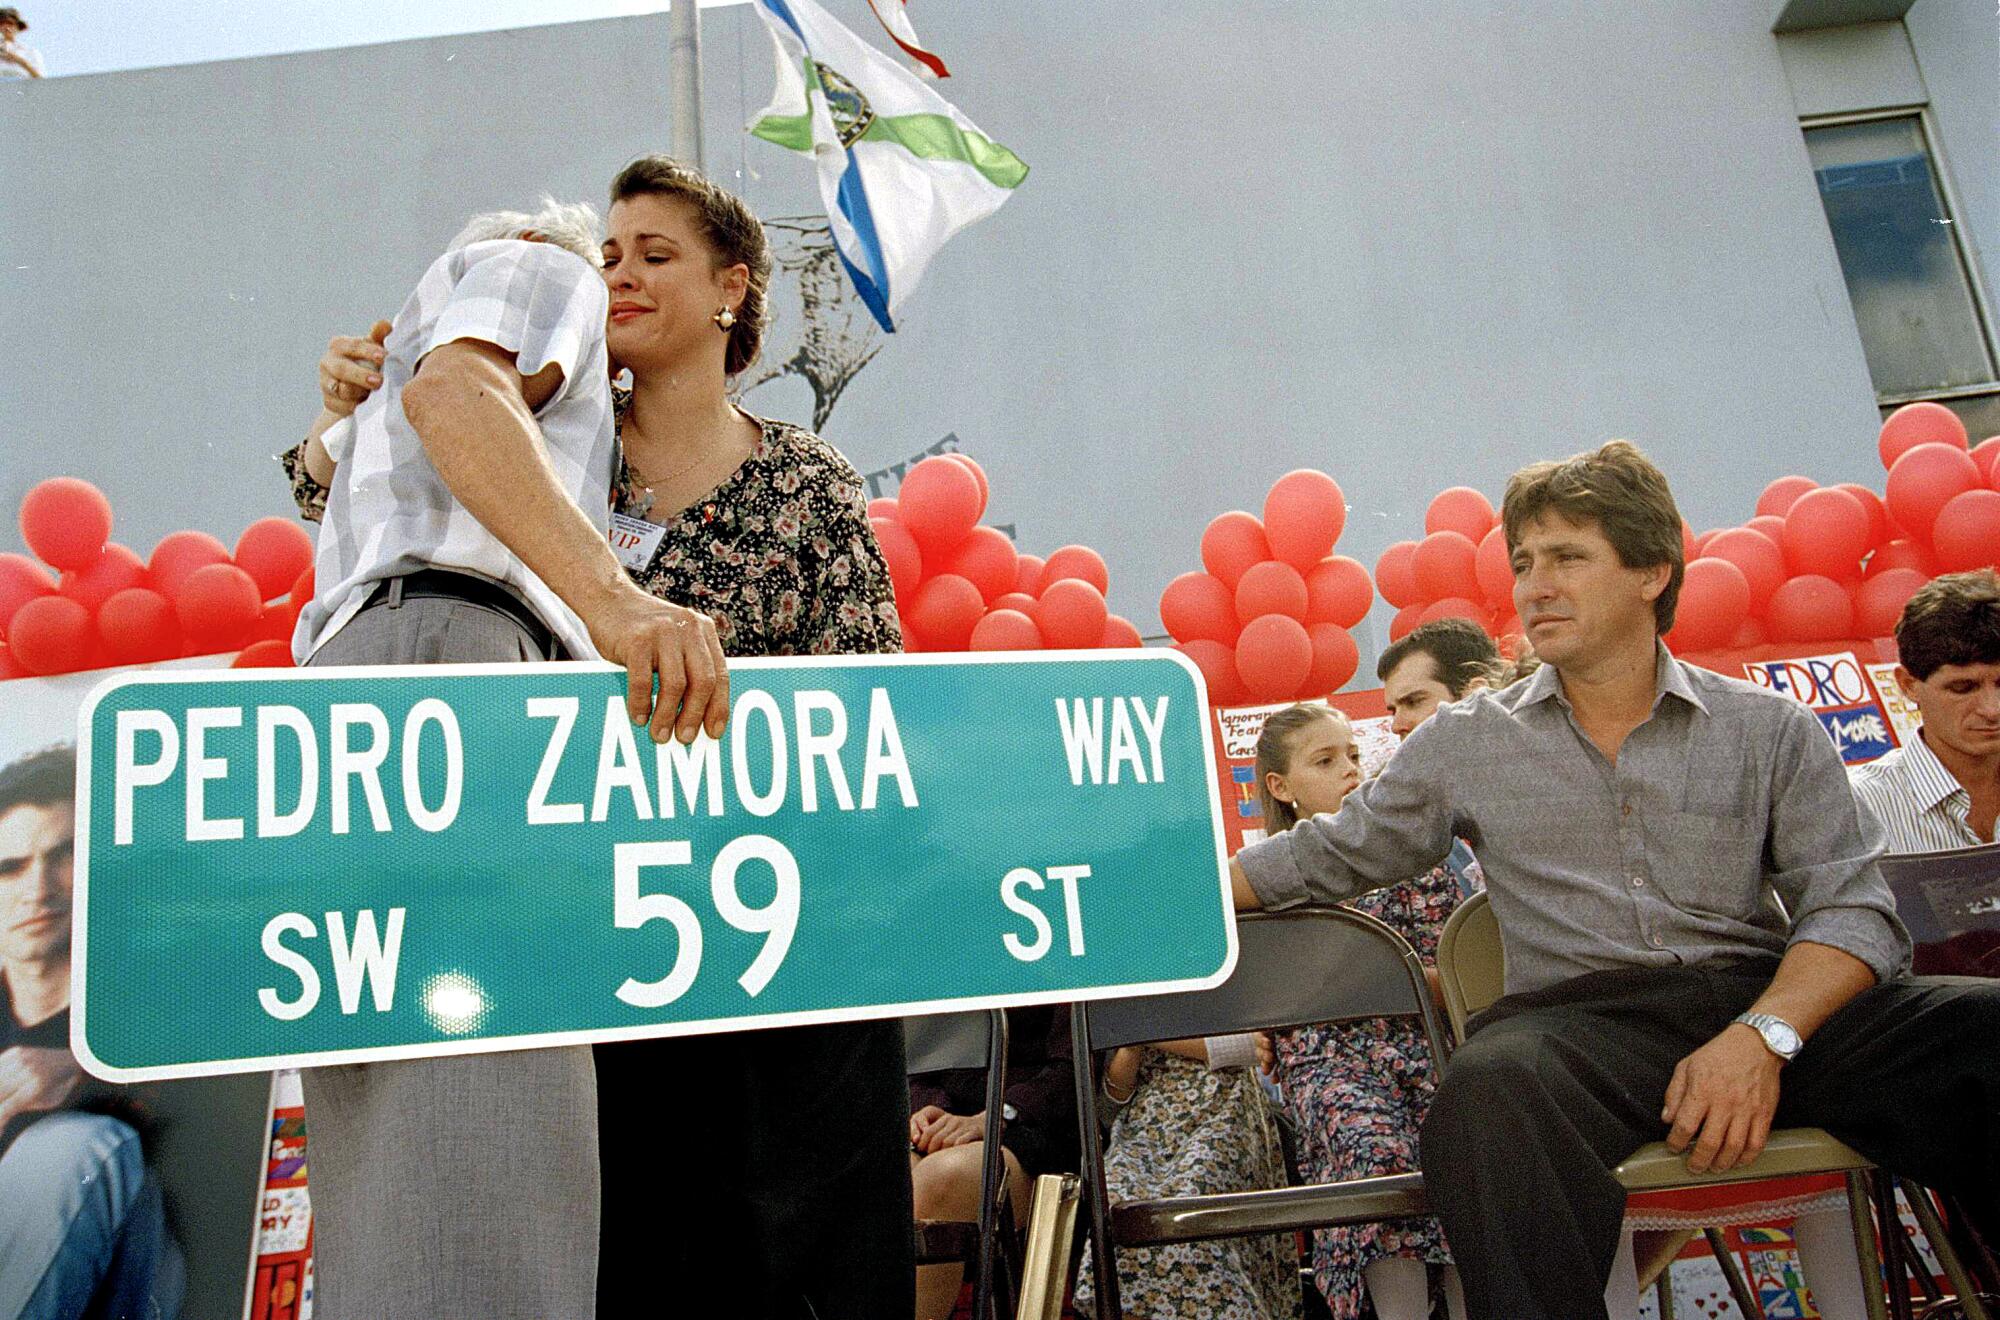 The sister of late AIDS activist Pedro Zamora, hugs her father after a street is named Pedro Zamora Way.